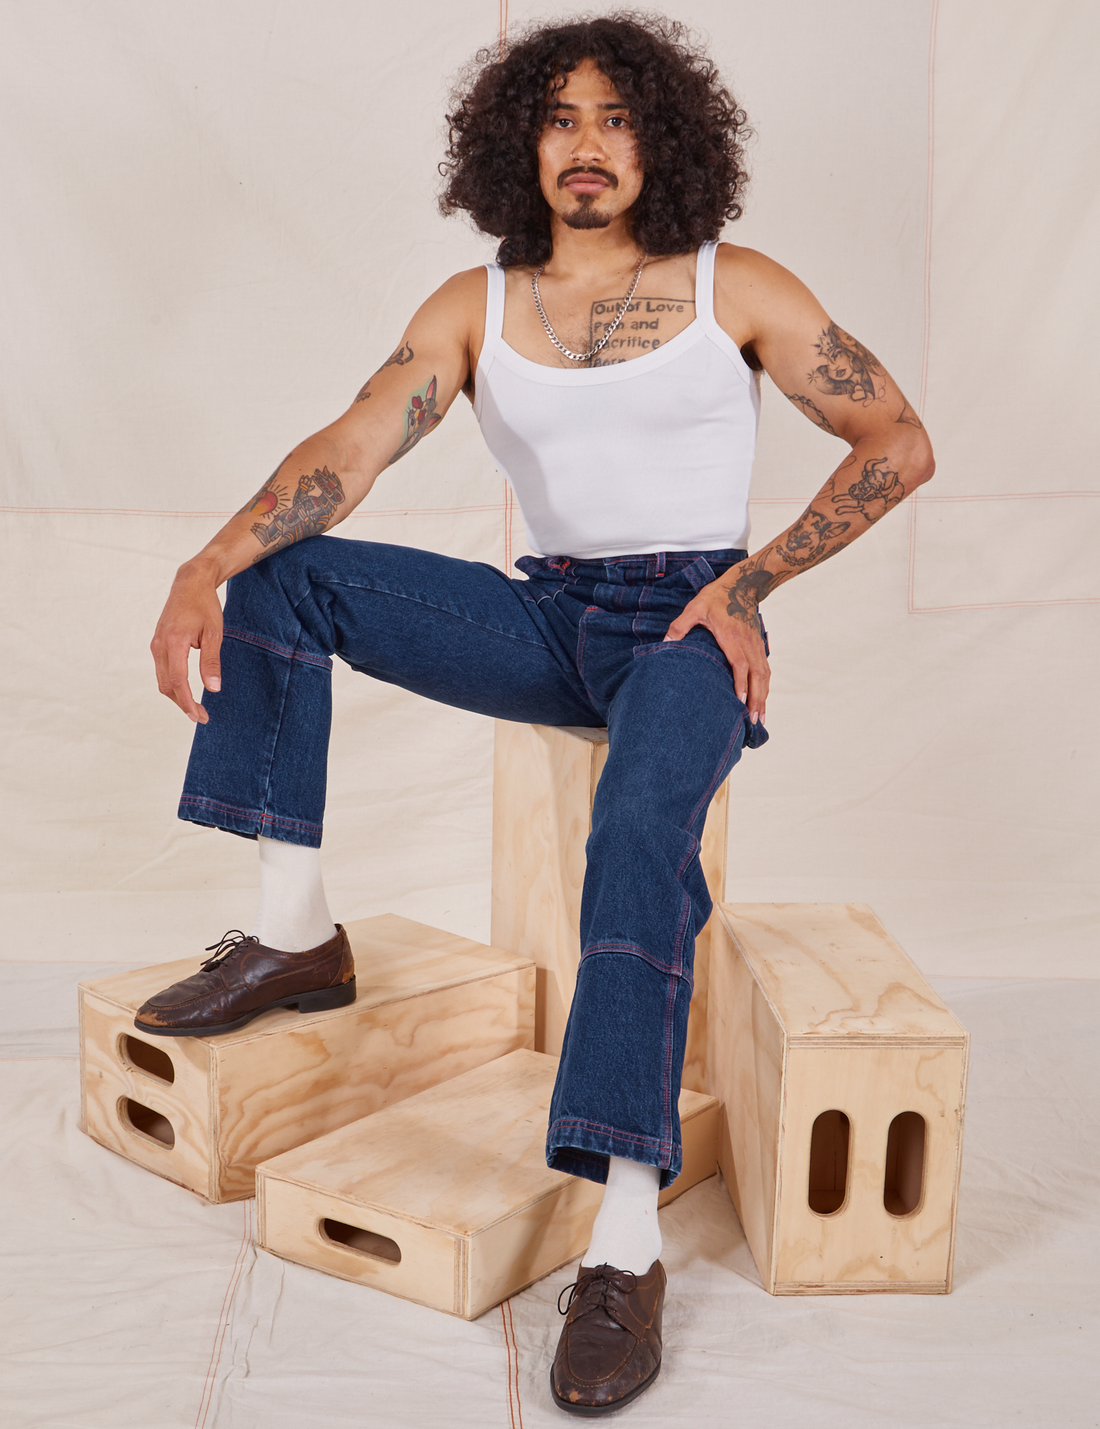 Jesse is sitting on a wooden crate. They are wearing Carpenter Jeans in Dark Wash and a vintage off-white Cami